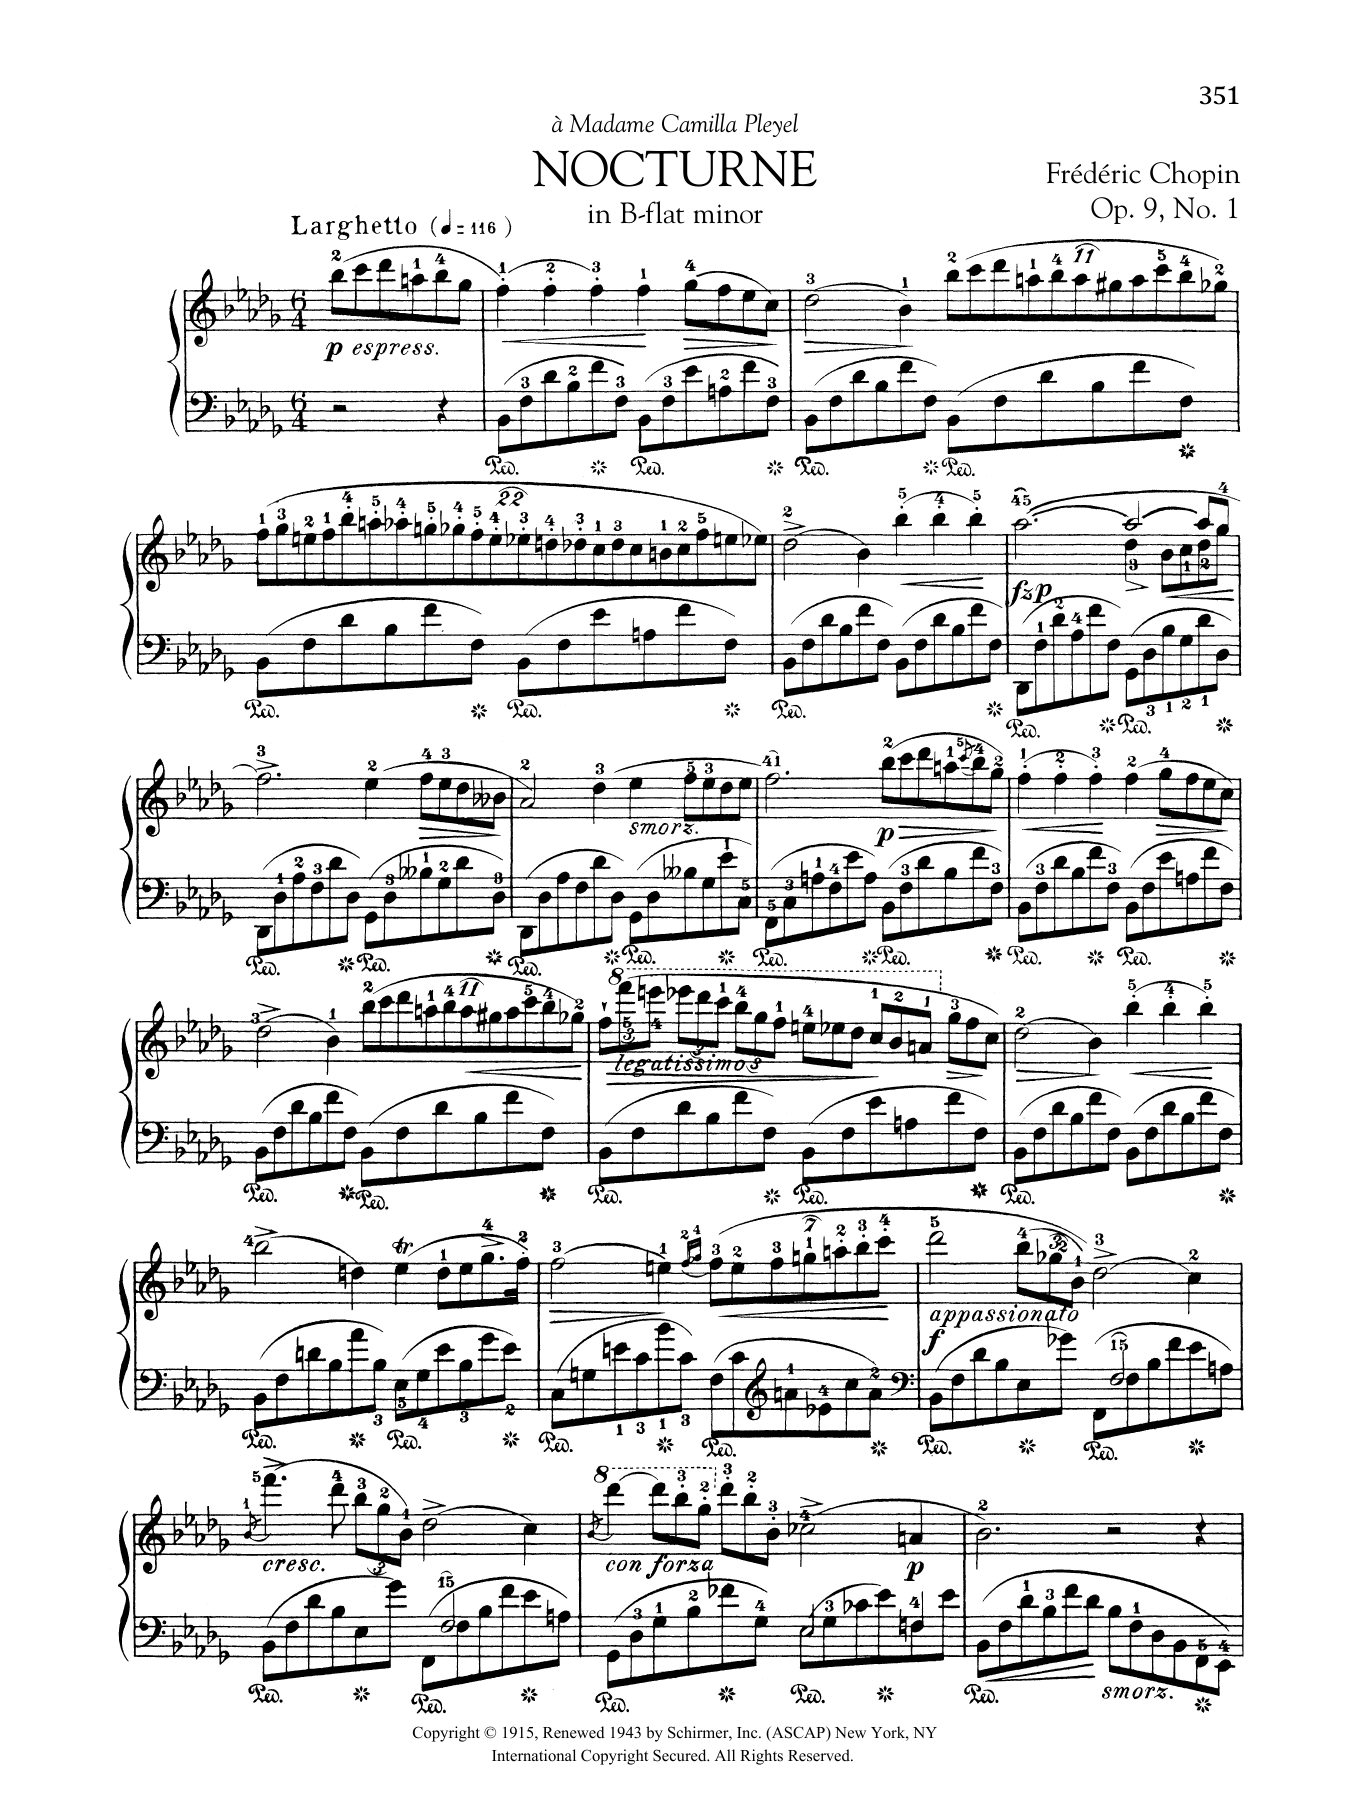 Download Frederic Chopin Nocturne in B-flat Minor, Op. 9, No. 1 Sheet Music